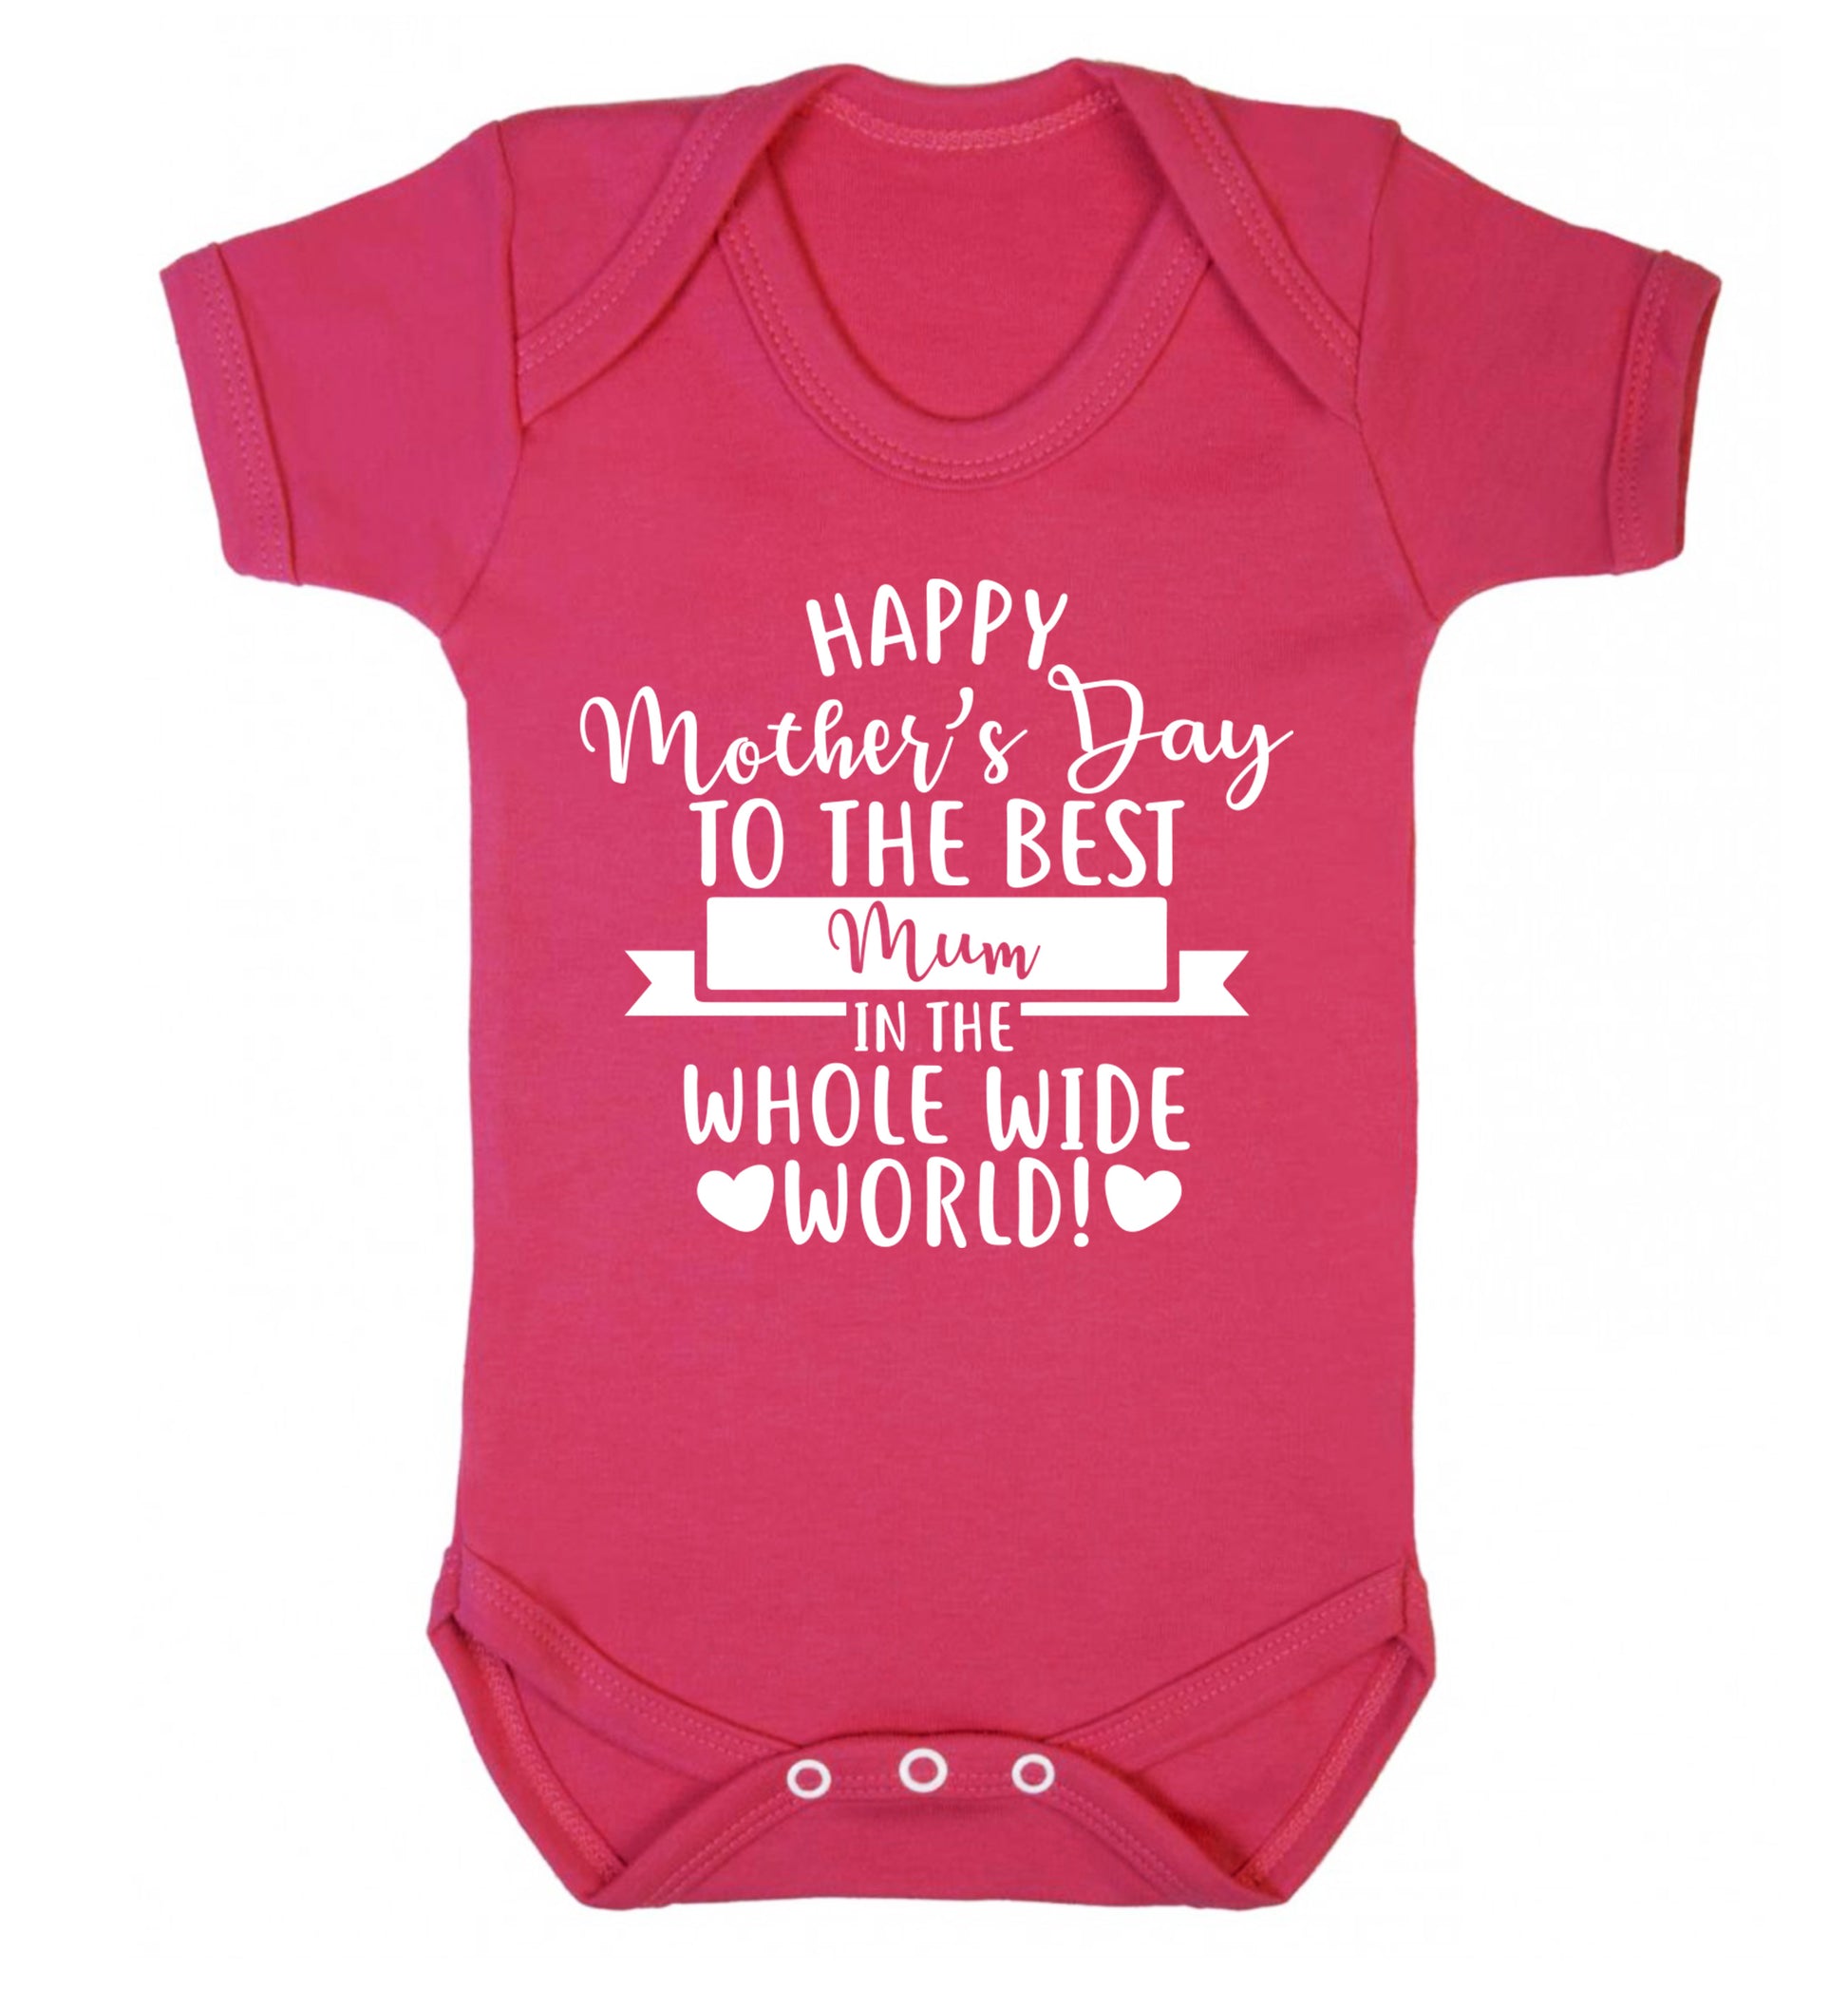 Happy Mother's Day to the best mum in the whole wide world! Baby Vest dark pink 18-24 months